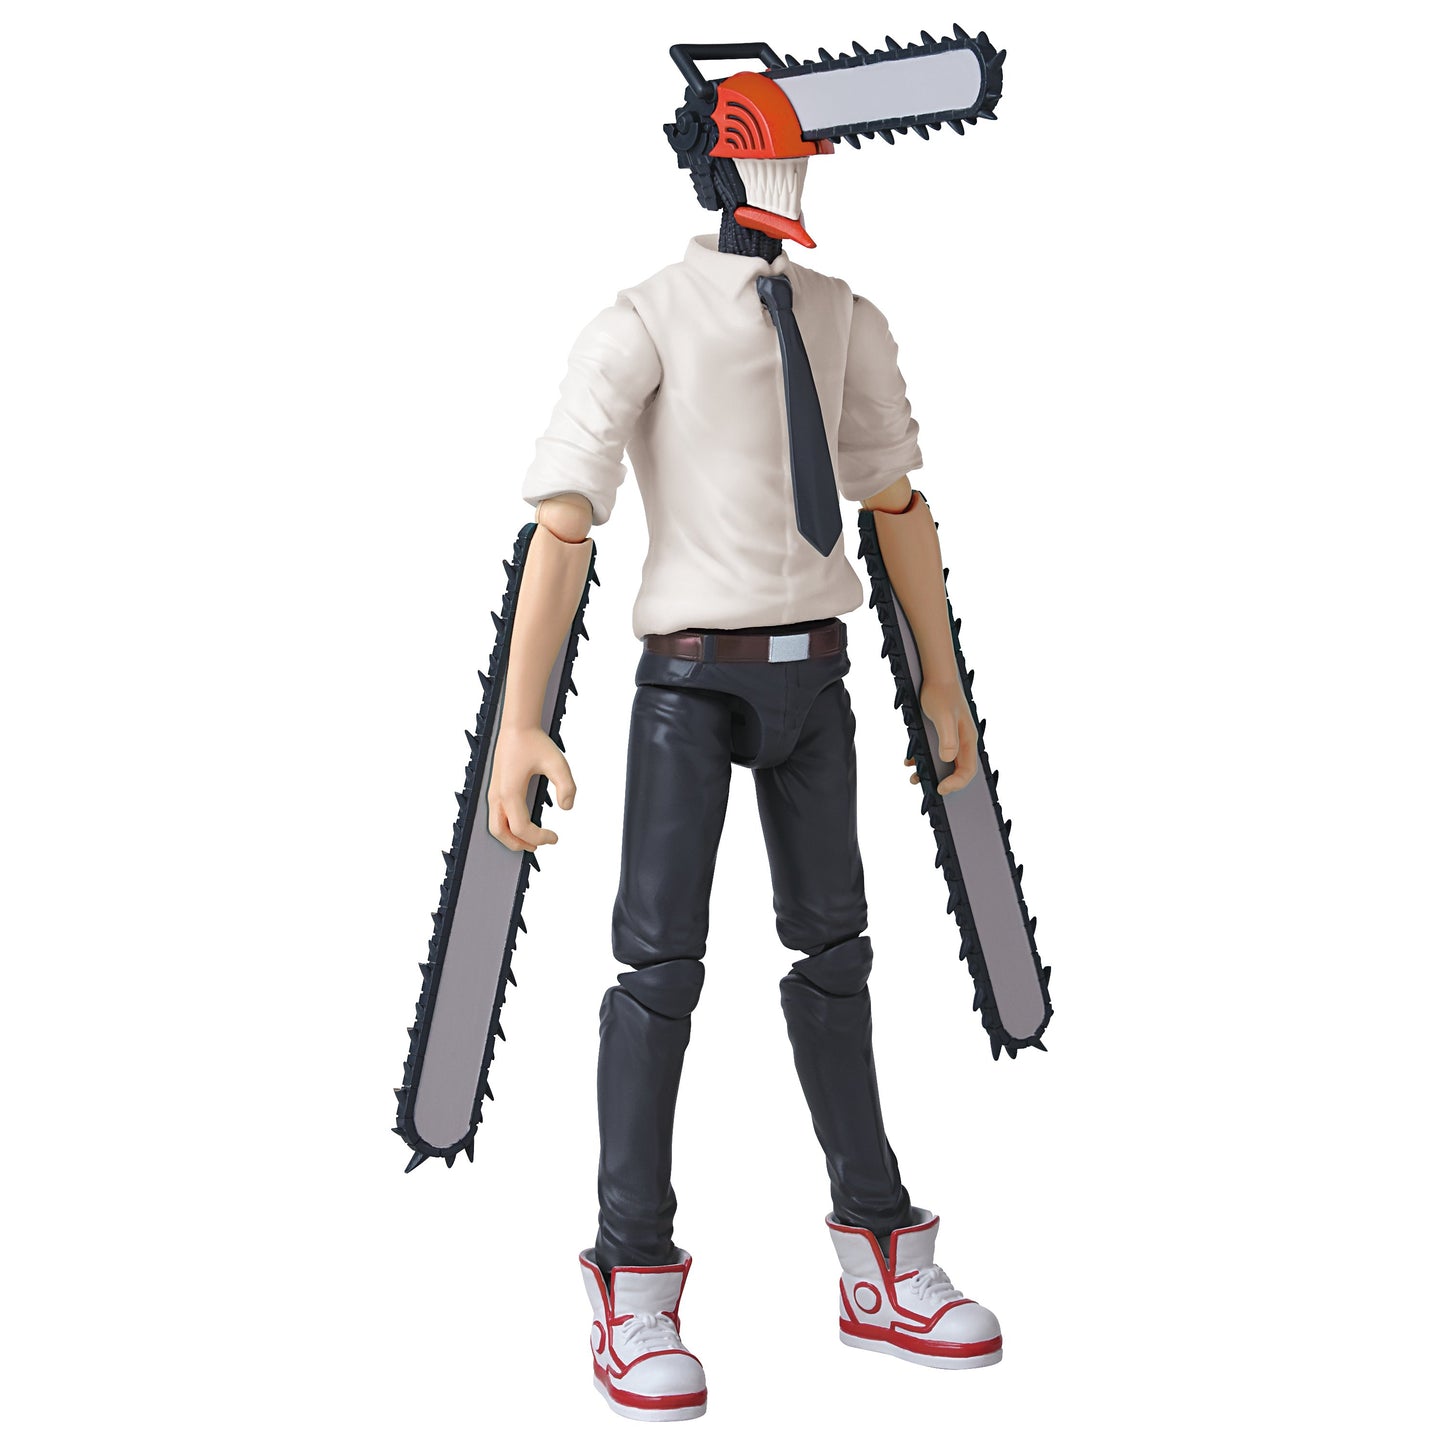 Chainsaw Man: Anime Heroes - Chainsaw Man Action Figure